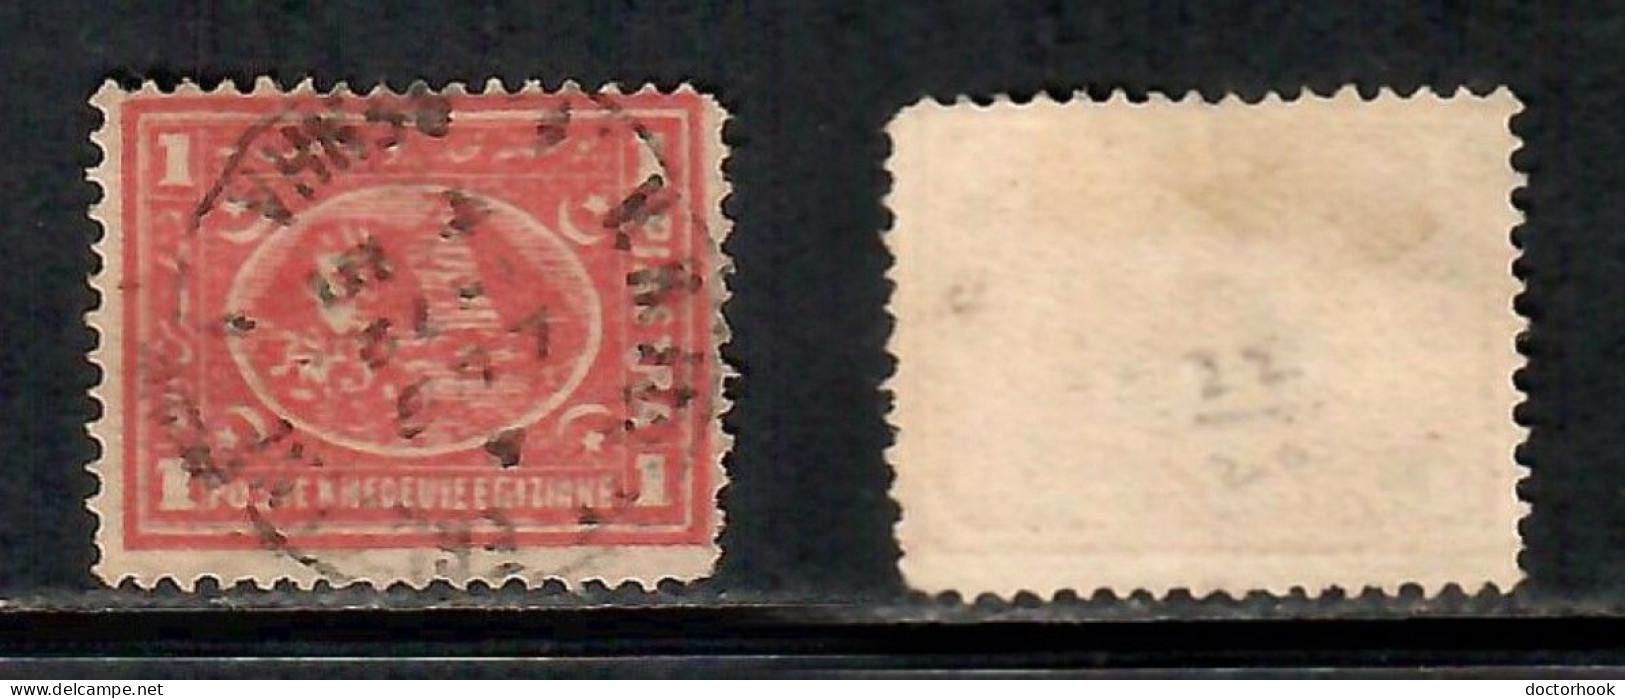 EGYPT    Scott # 22 USED (CONDITION PER SCAN) (Stamp Scan # 1036-9) - 1866-1914 Khedivate Of Egypt